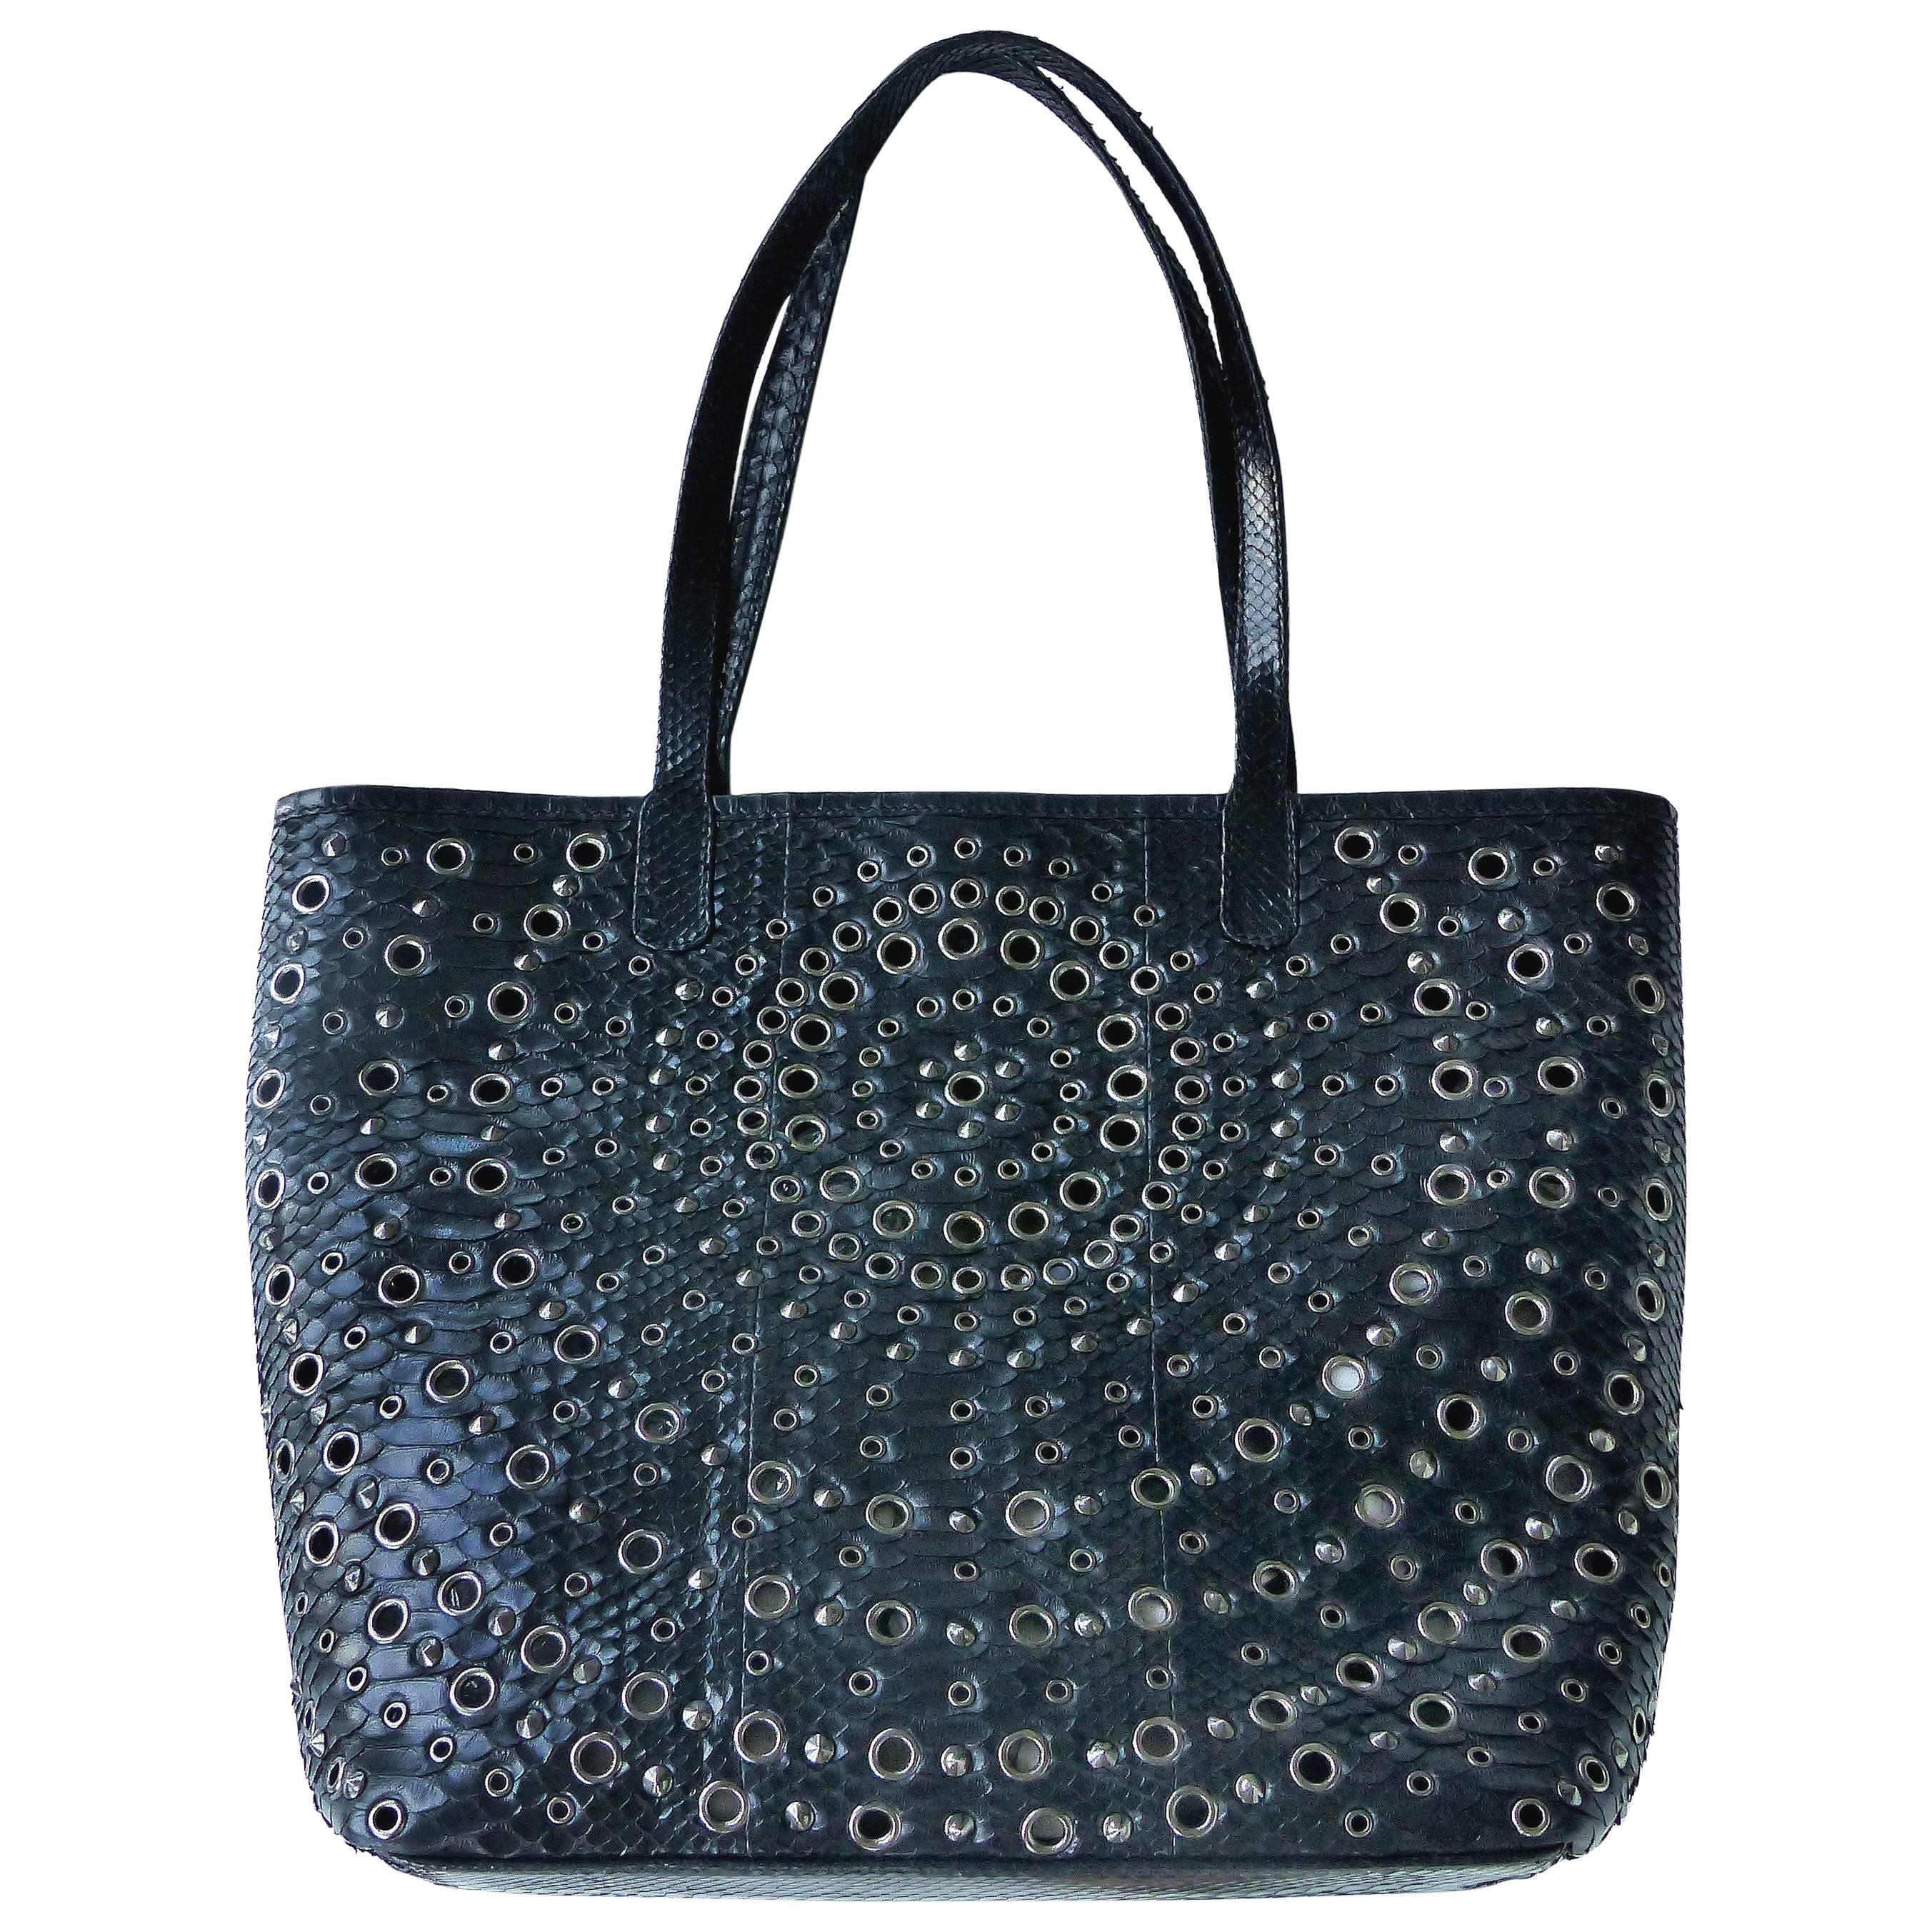 Black Rock Python Perforated and Studded Tote by Glen Arthur Designs for GabBag For Sale